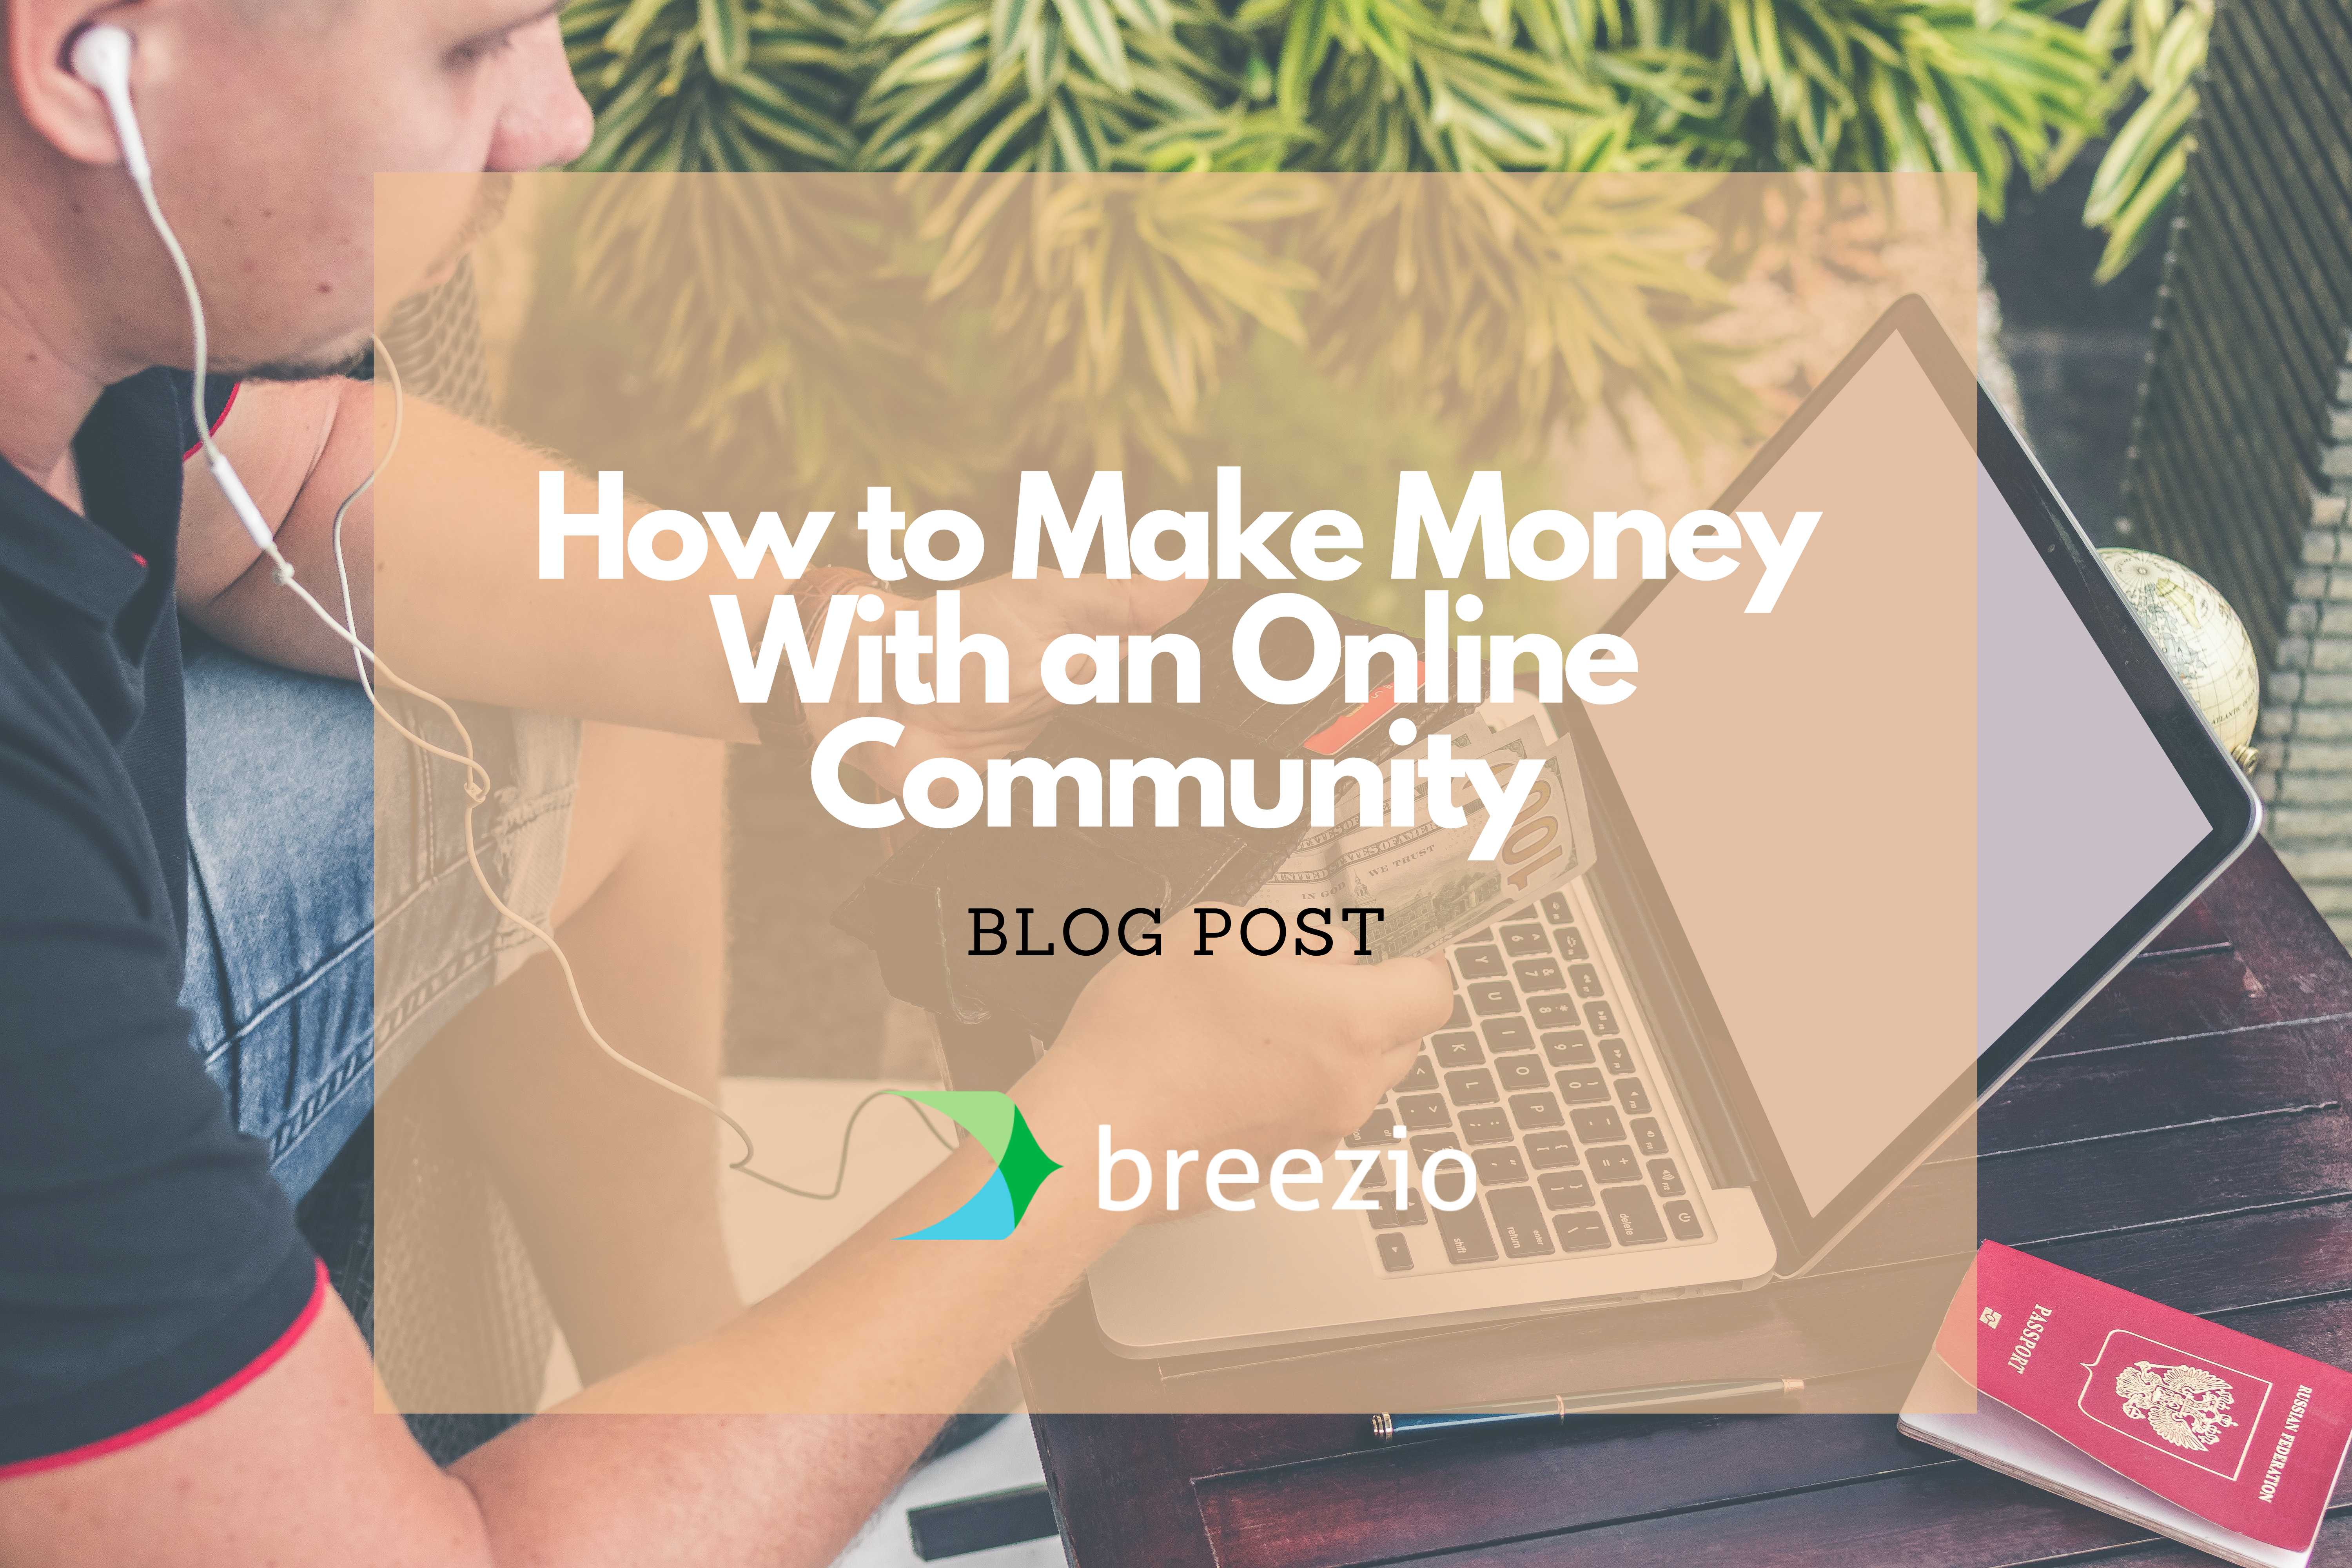 Diversifying Revenue Stream - How to Make Money With an Online Community